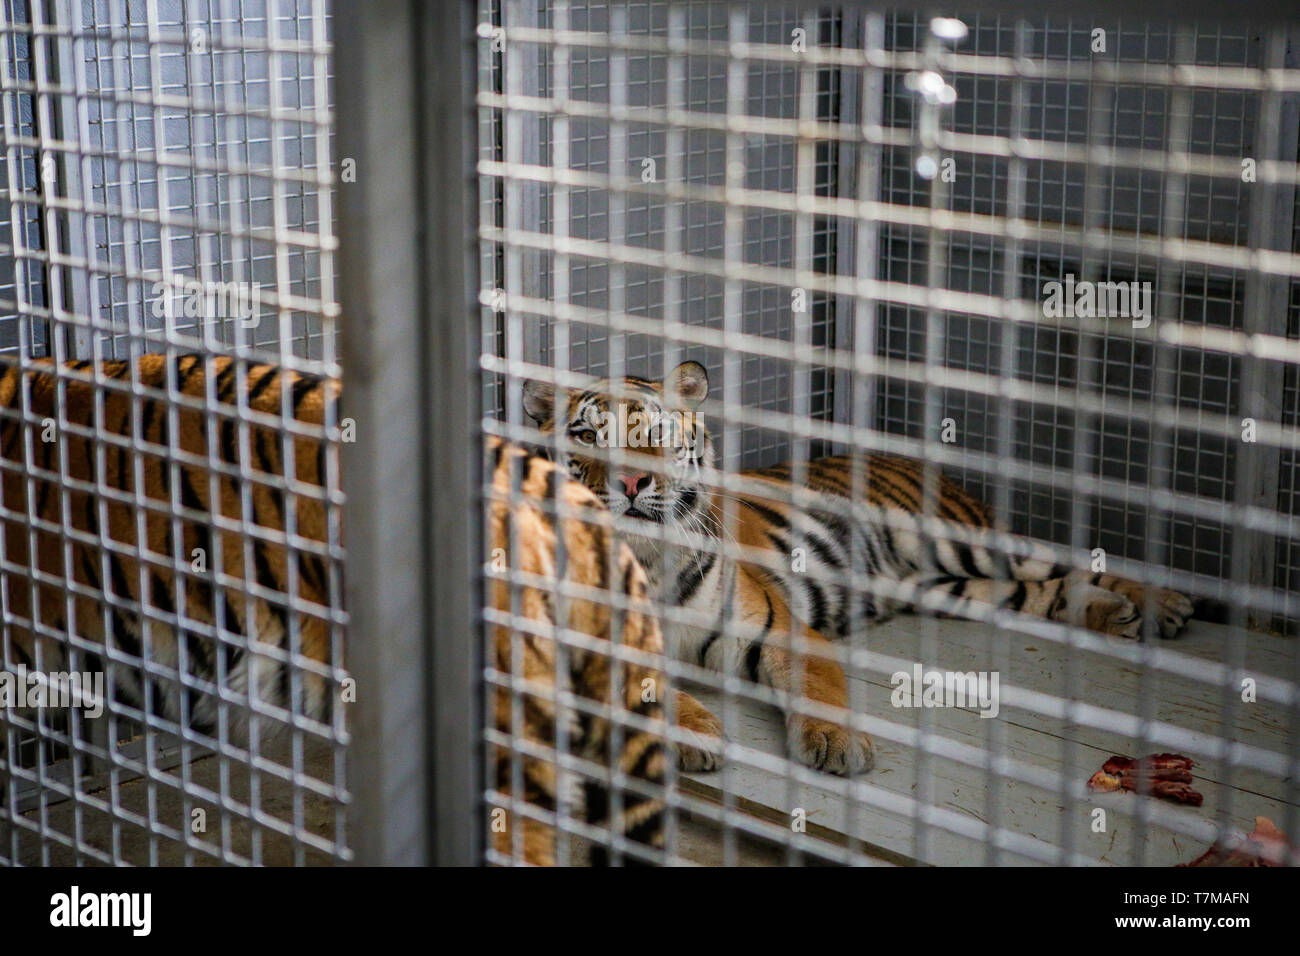 Wild Siberian tiger kept in cage inside a circus menagerie - animal abuse Stock Photo